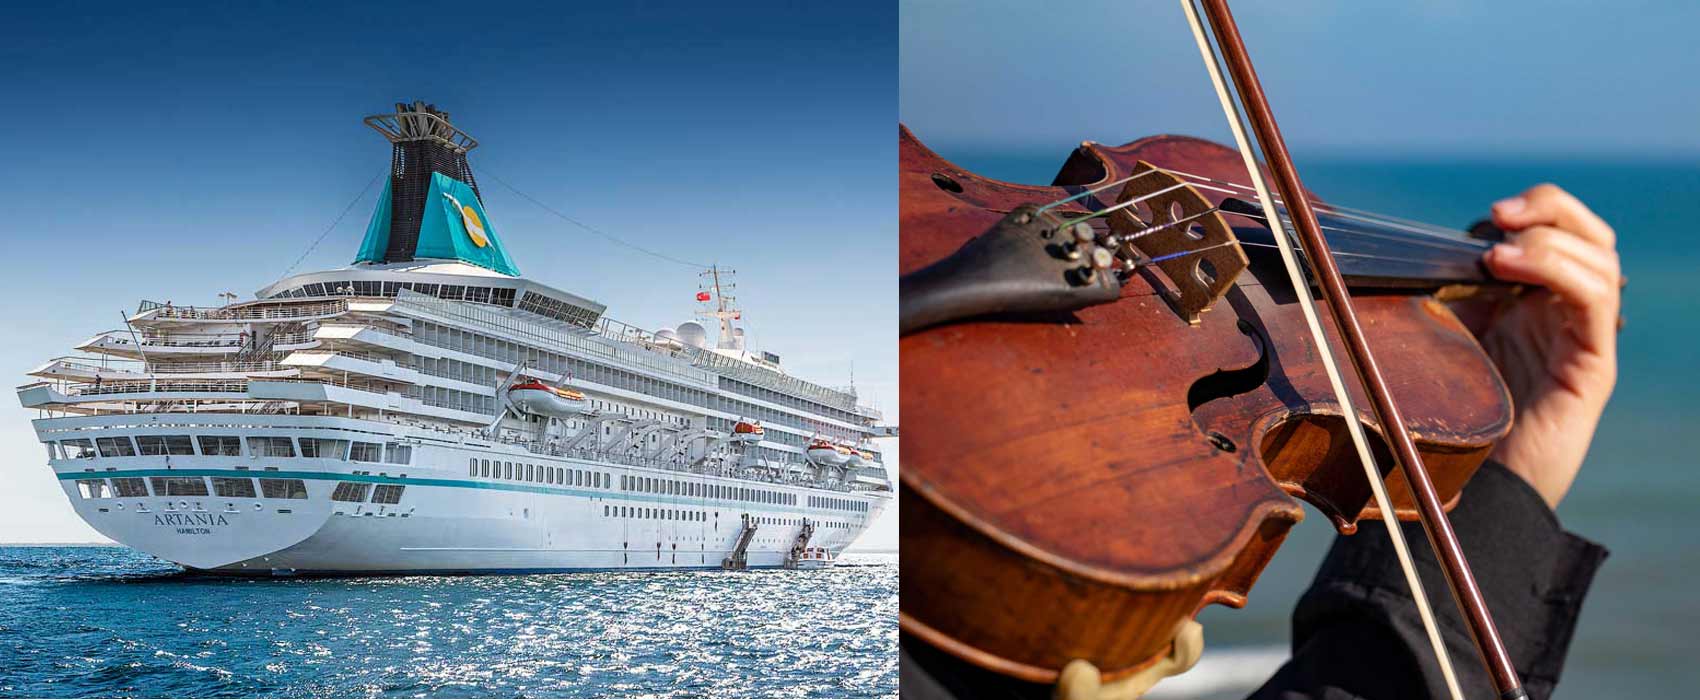 From 17/6 to 27/6 : Cruise with Music in Scandinavia 